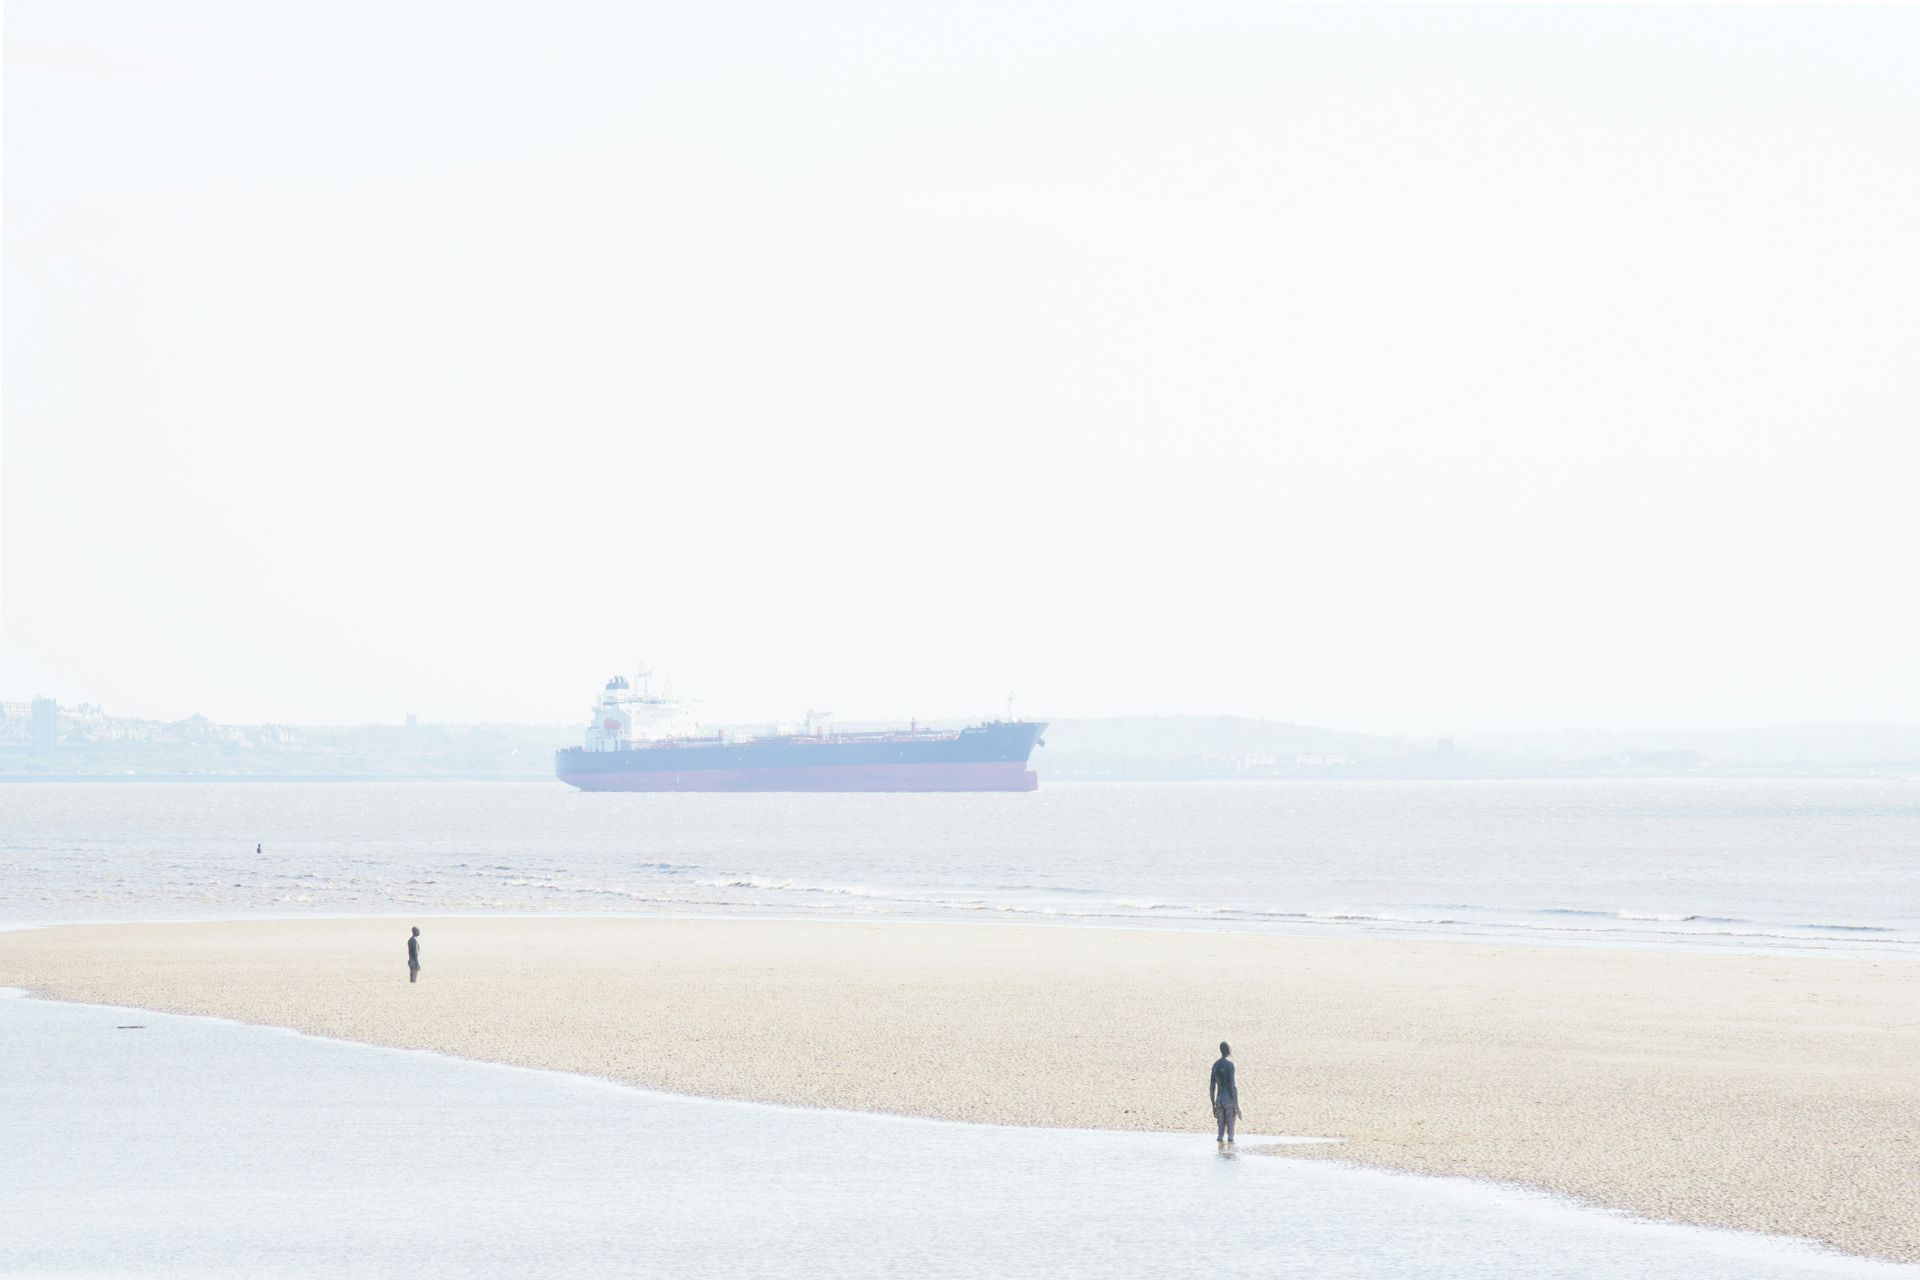 Planning A Visit To Crosby Beach? Here’s Everything You Need To Know